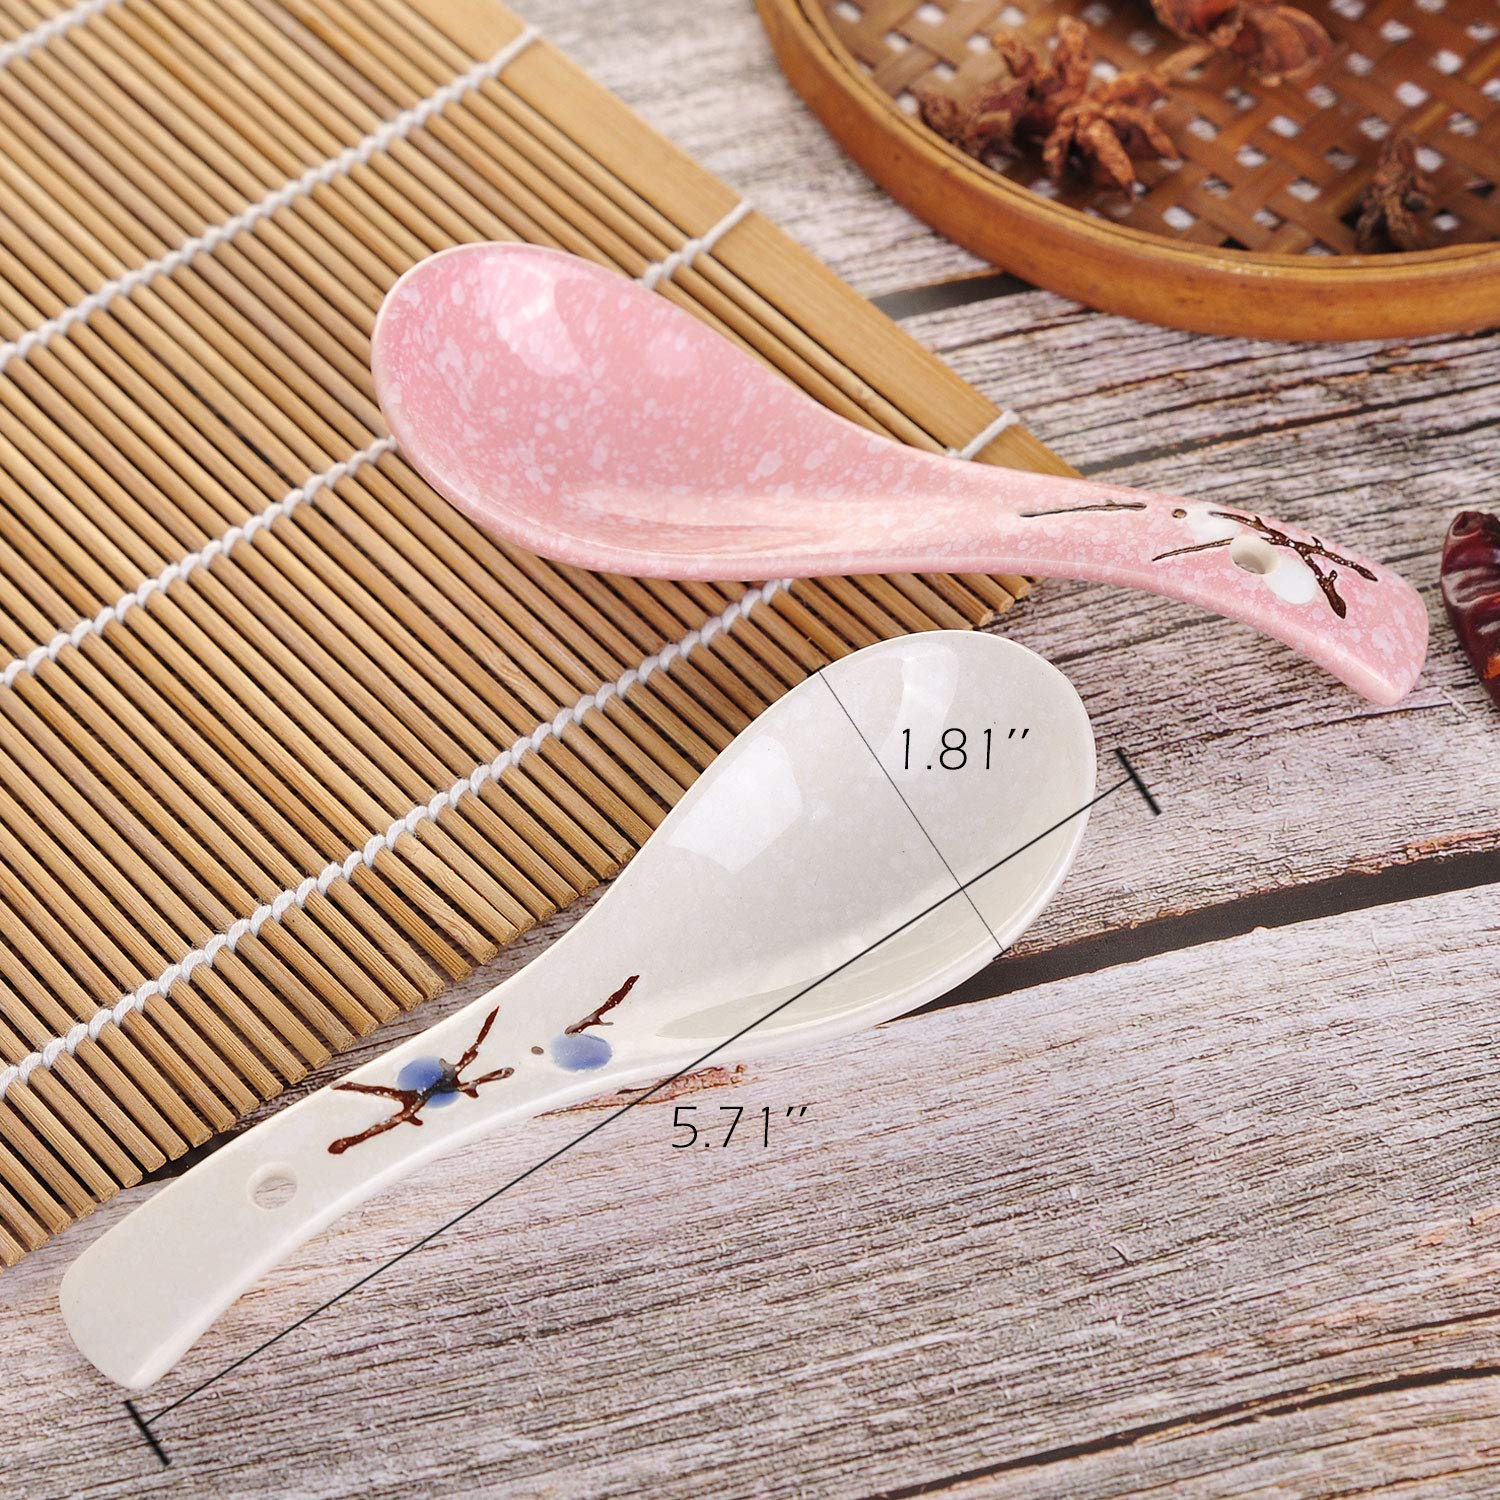 VanEnjoy Set of 4 Chinese/Japanese Ceramic Soup Spoons, Pink Cherry Blossom in Snow Pattern Ceramic Spoon Suitable for Soup